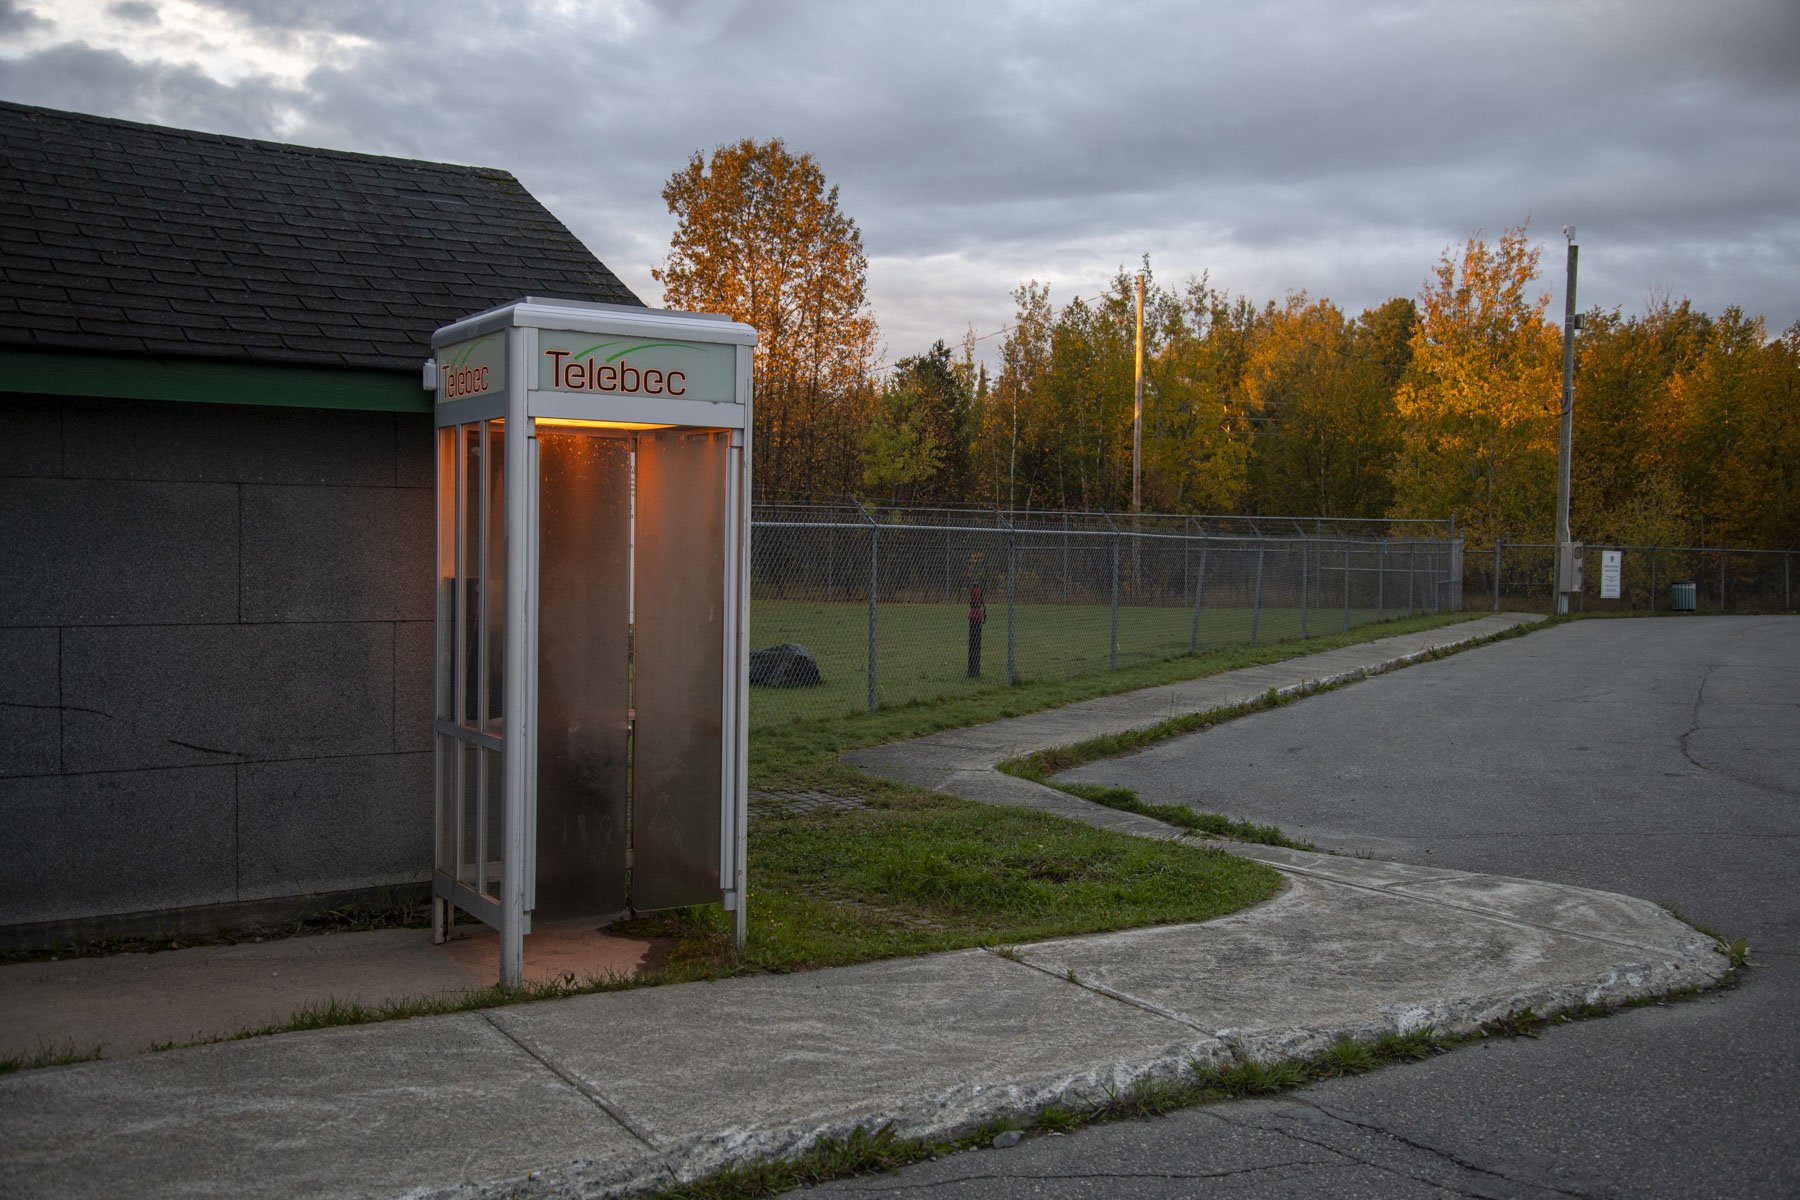  The morning sun lights up a telephone booth at the entrance of the former Lamaque mine. Maintaining and upholding a national historic site, like the mining village of Bourlamaque and La Cité de l’Or, is a reminder that preserving the past is not a s